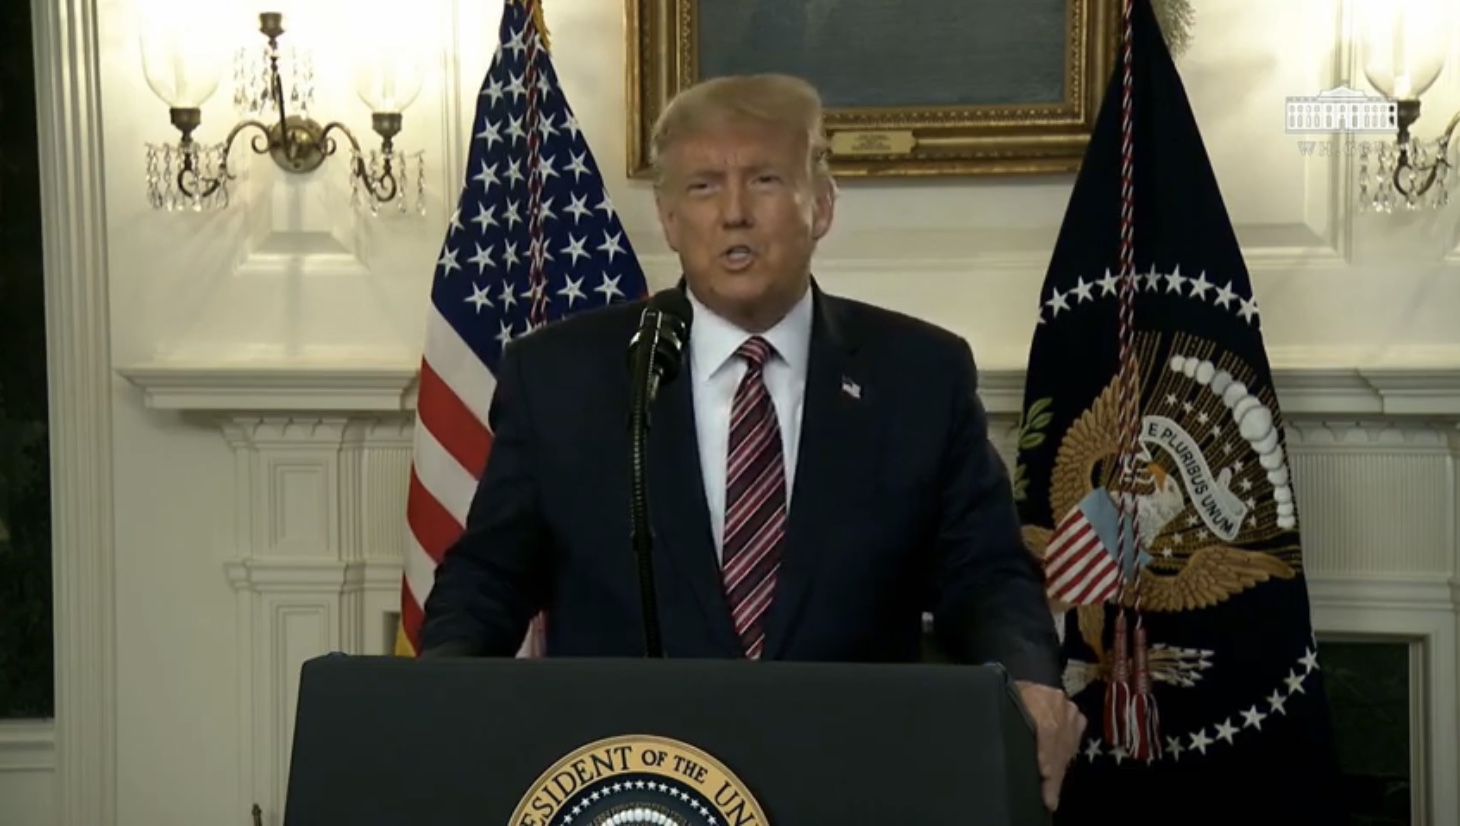 Press Release: President Trump Puts Americans First with Focus on Judiciary